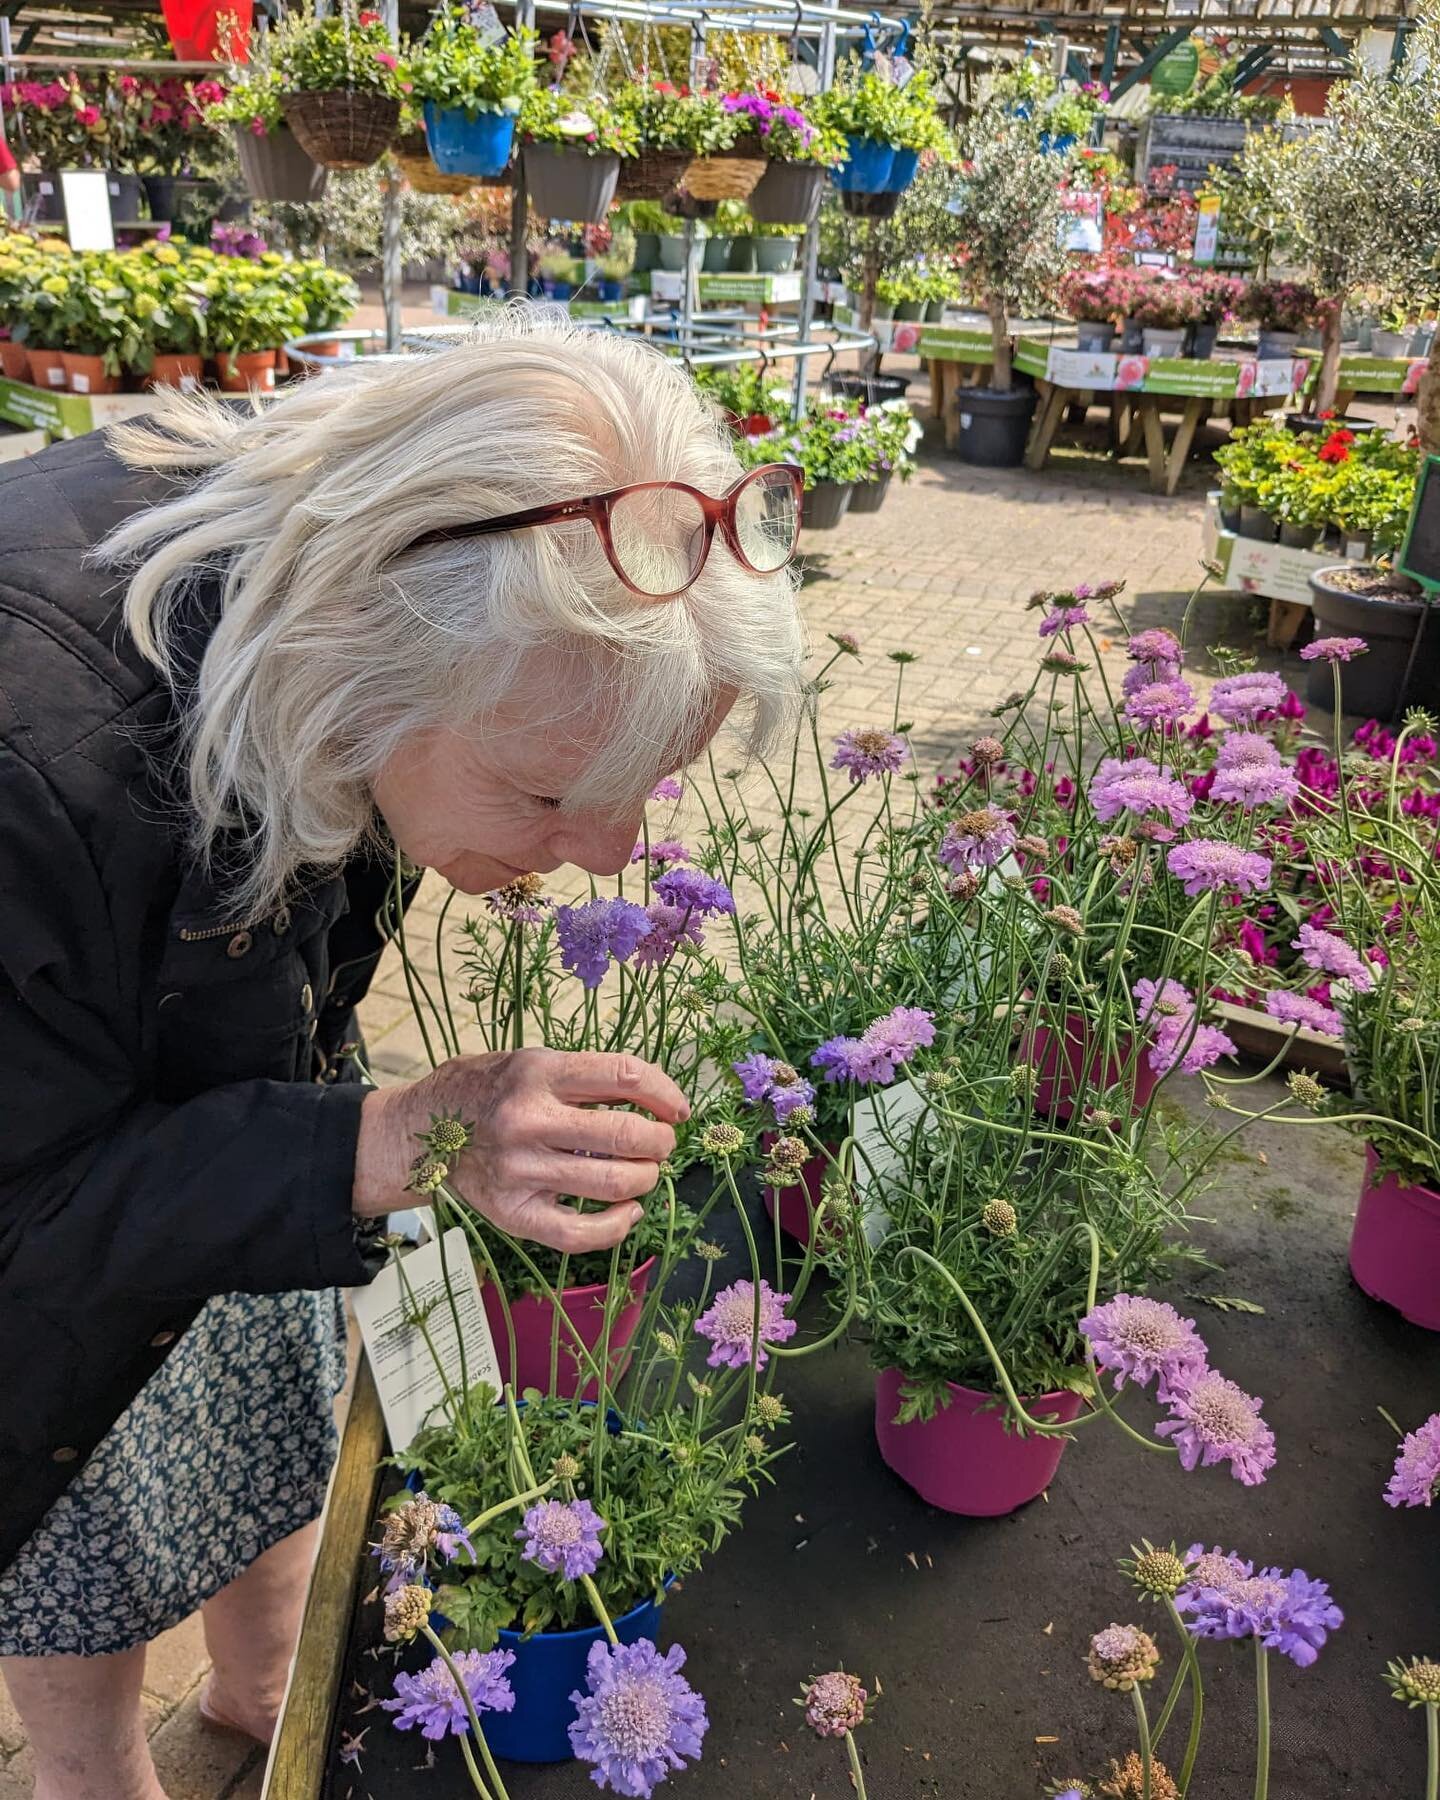 We had a wonderful time at the garden centre. It was time well spent amidst flowers in bloom, which lifted our spirits and helped us reflect on the beauty of creation.
.
.
.
.
#garden #nature #flowers #beautifuldestinations #seniorcare